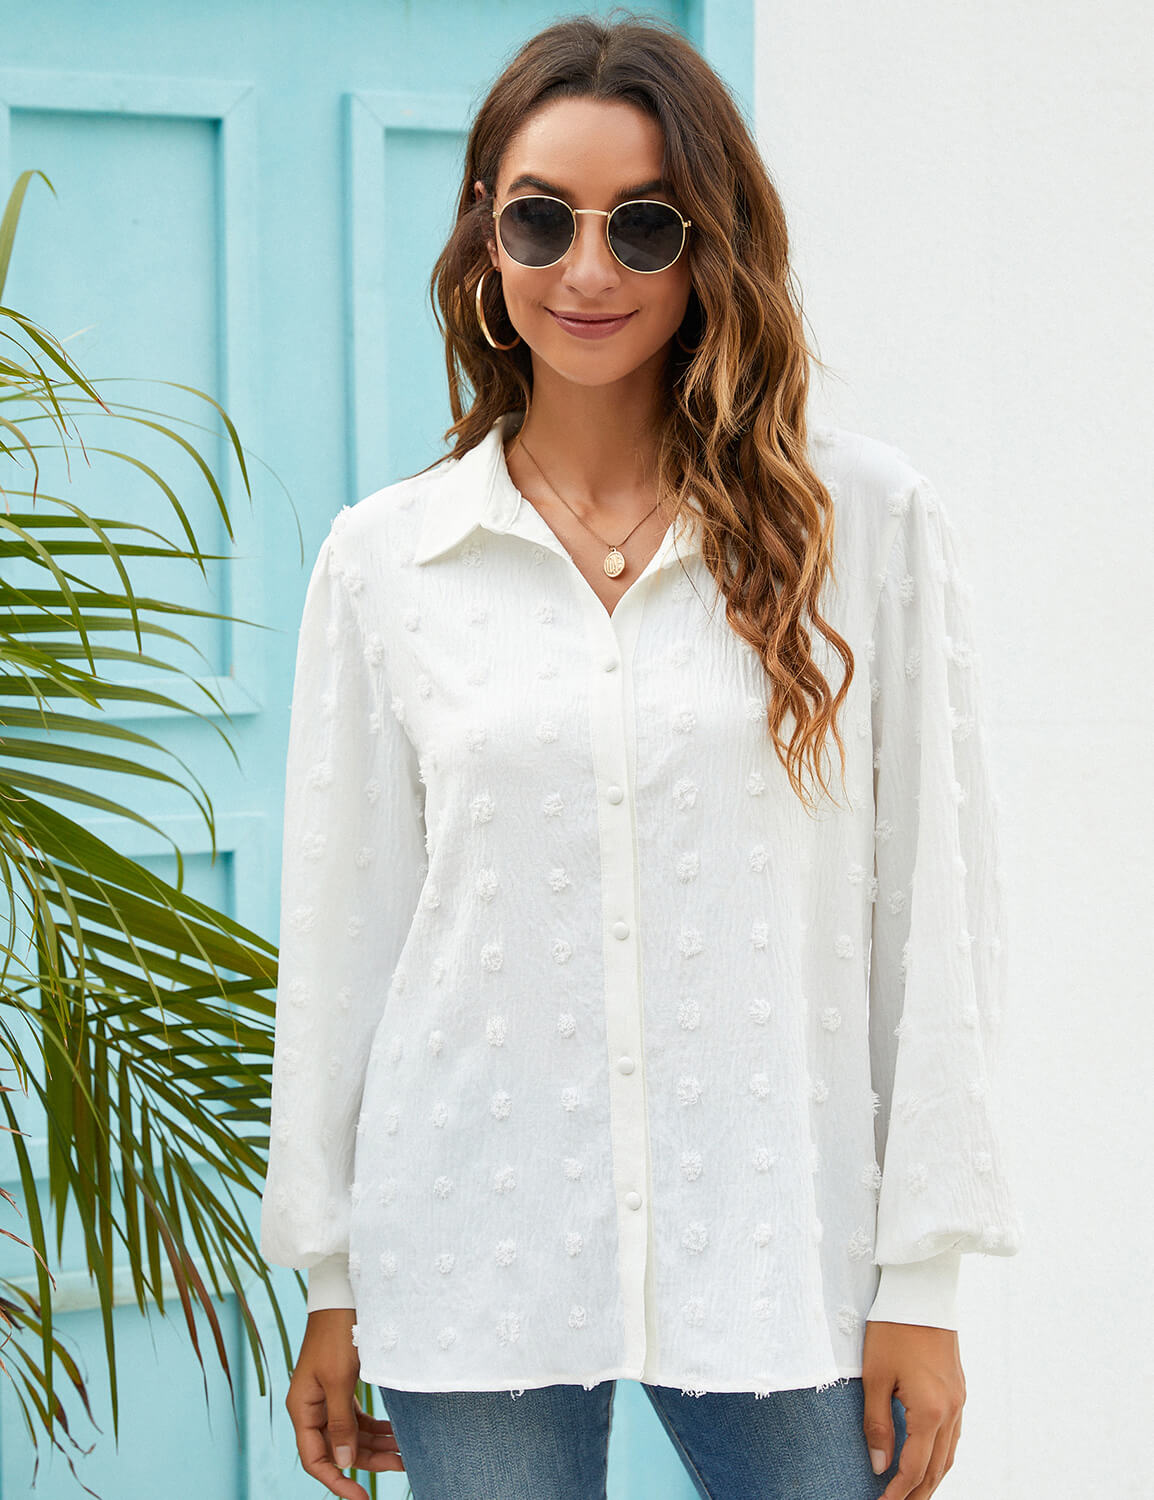 Blooming Jelly Women's Button White Shirt for Casual